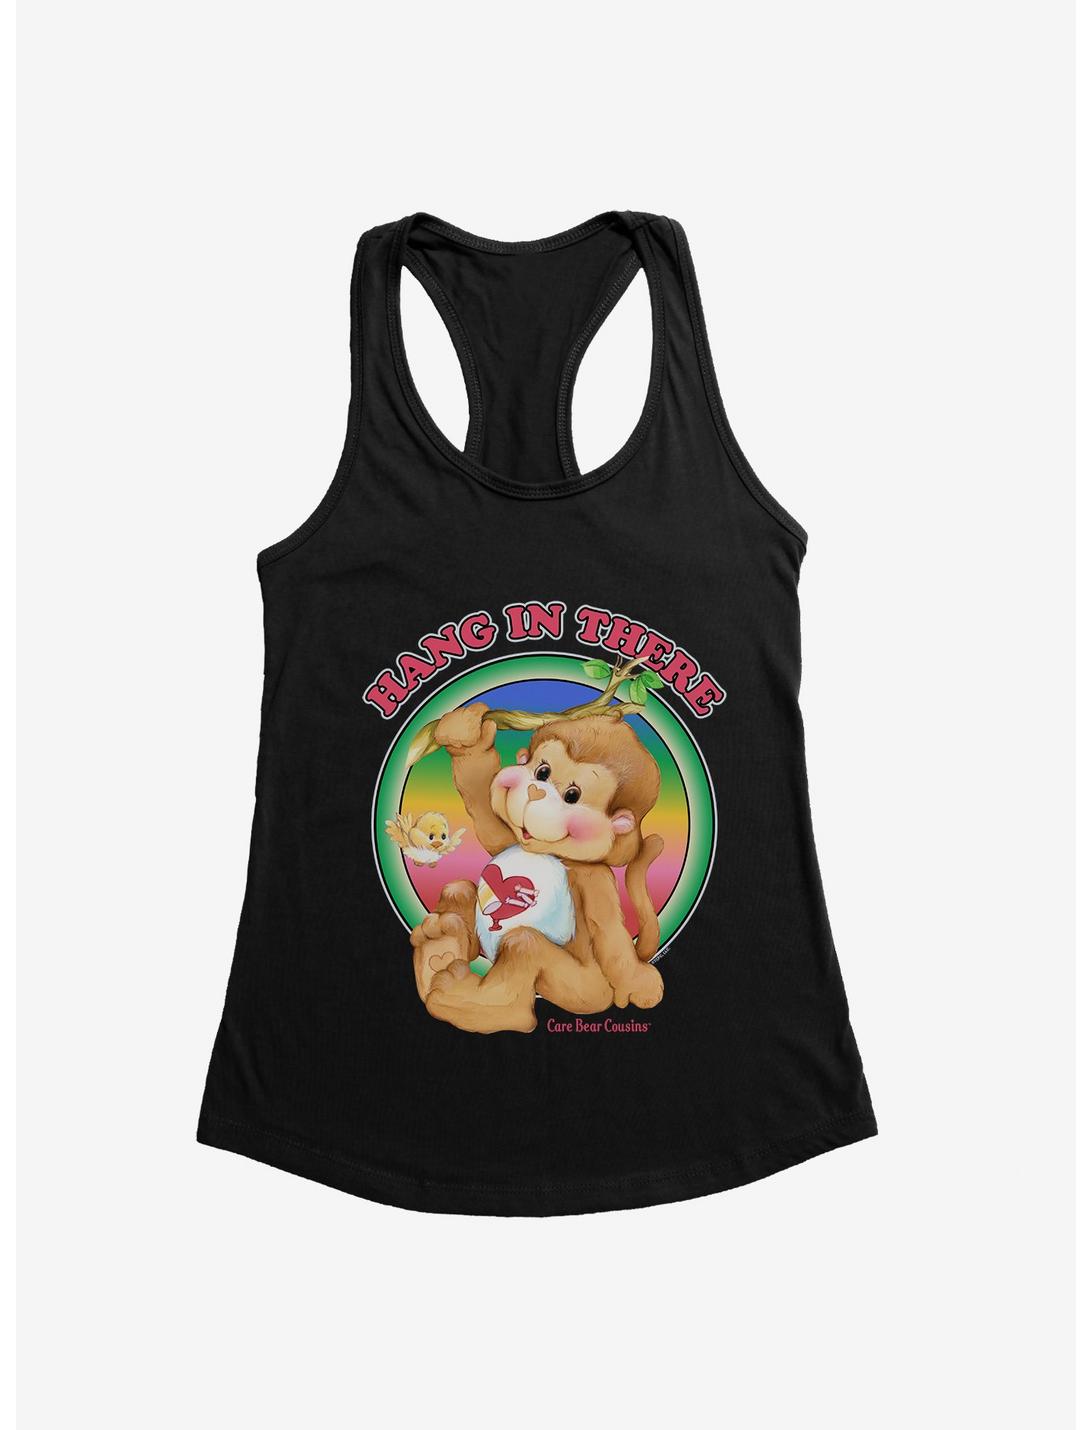 Care Bear Cousins Playful Heart Monkey Hang In There Girls Tank, BLACK, hi-res